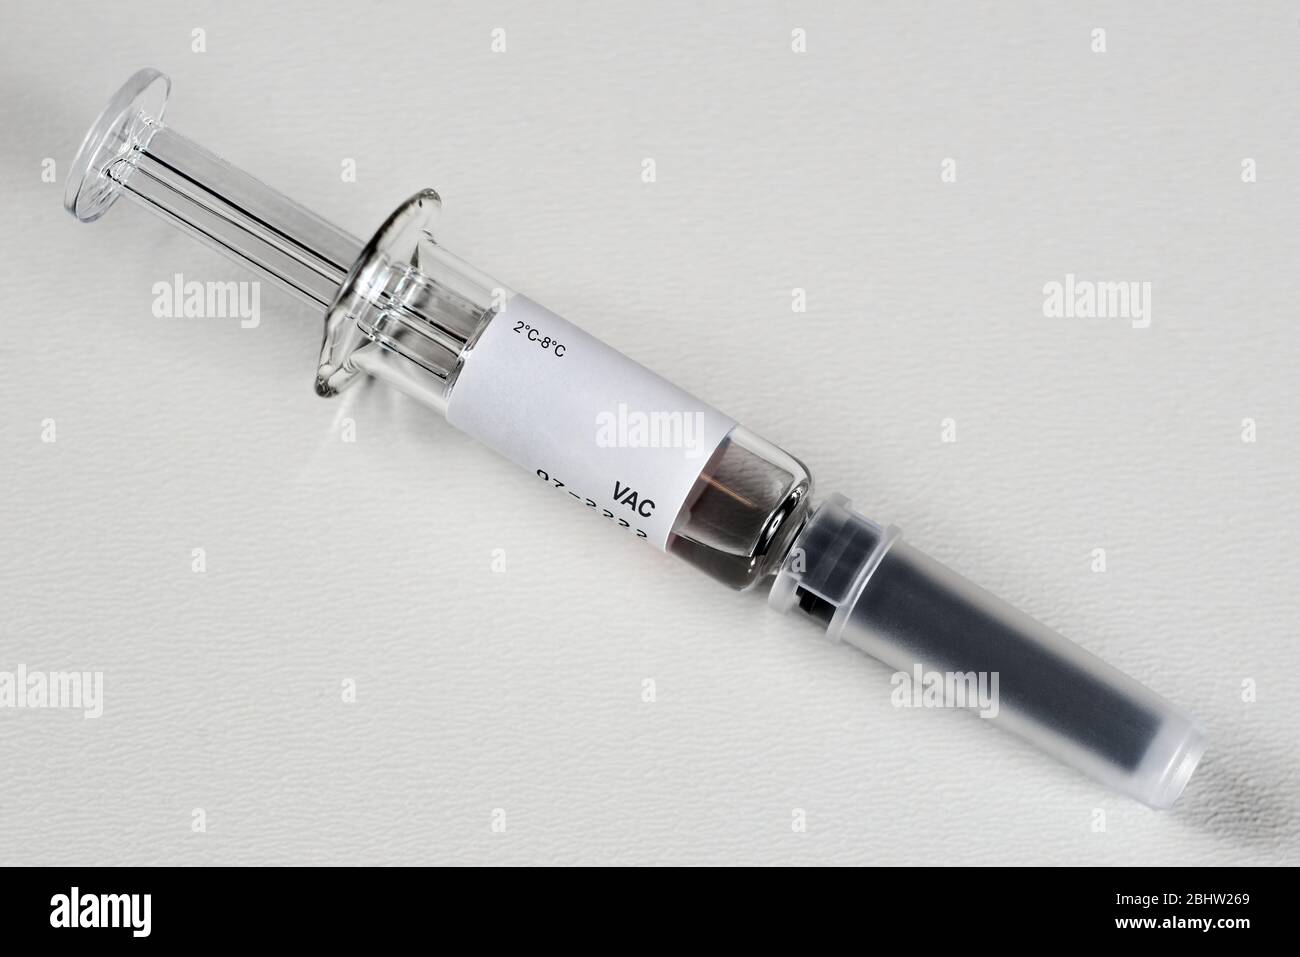 Pre-filled syringe injection with vaccine for vaccination inoculation Stock Photo